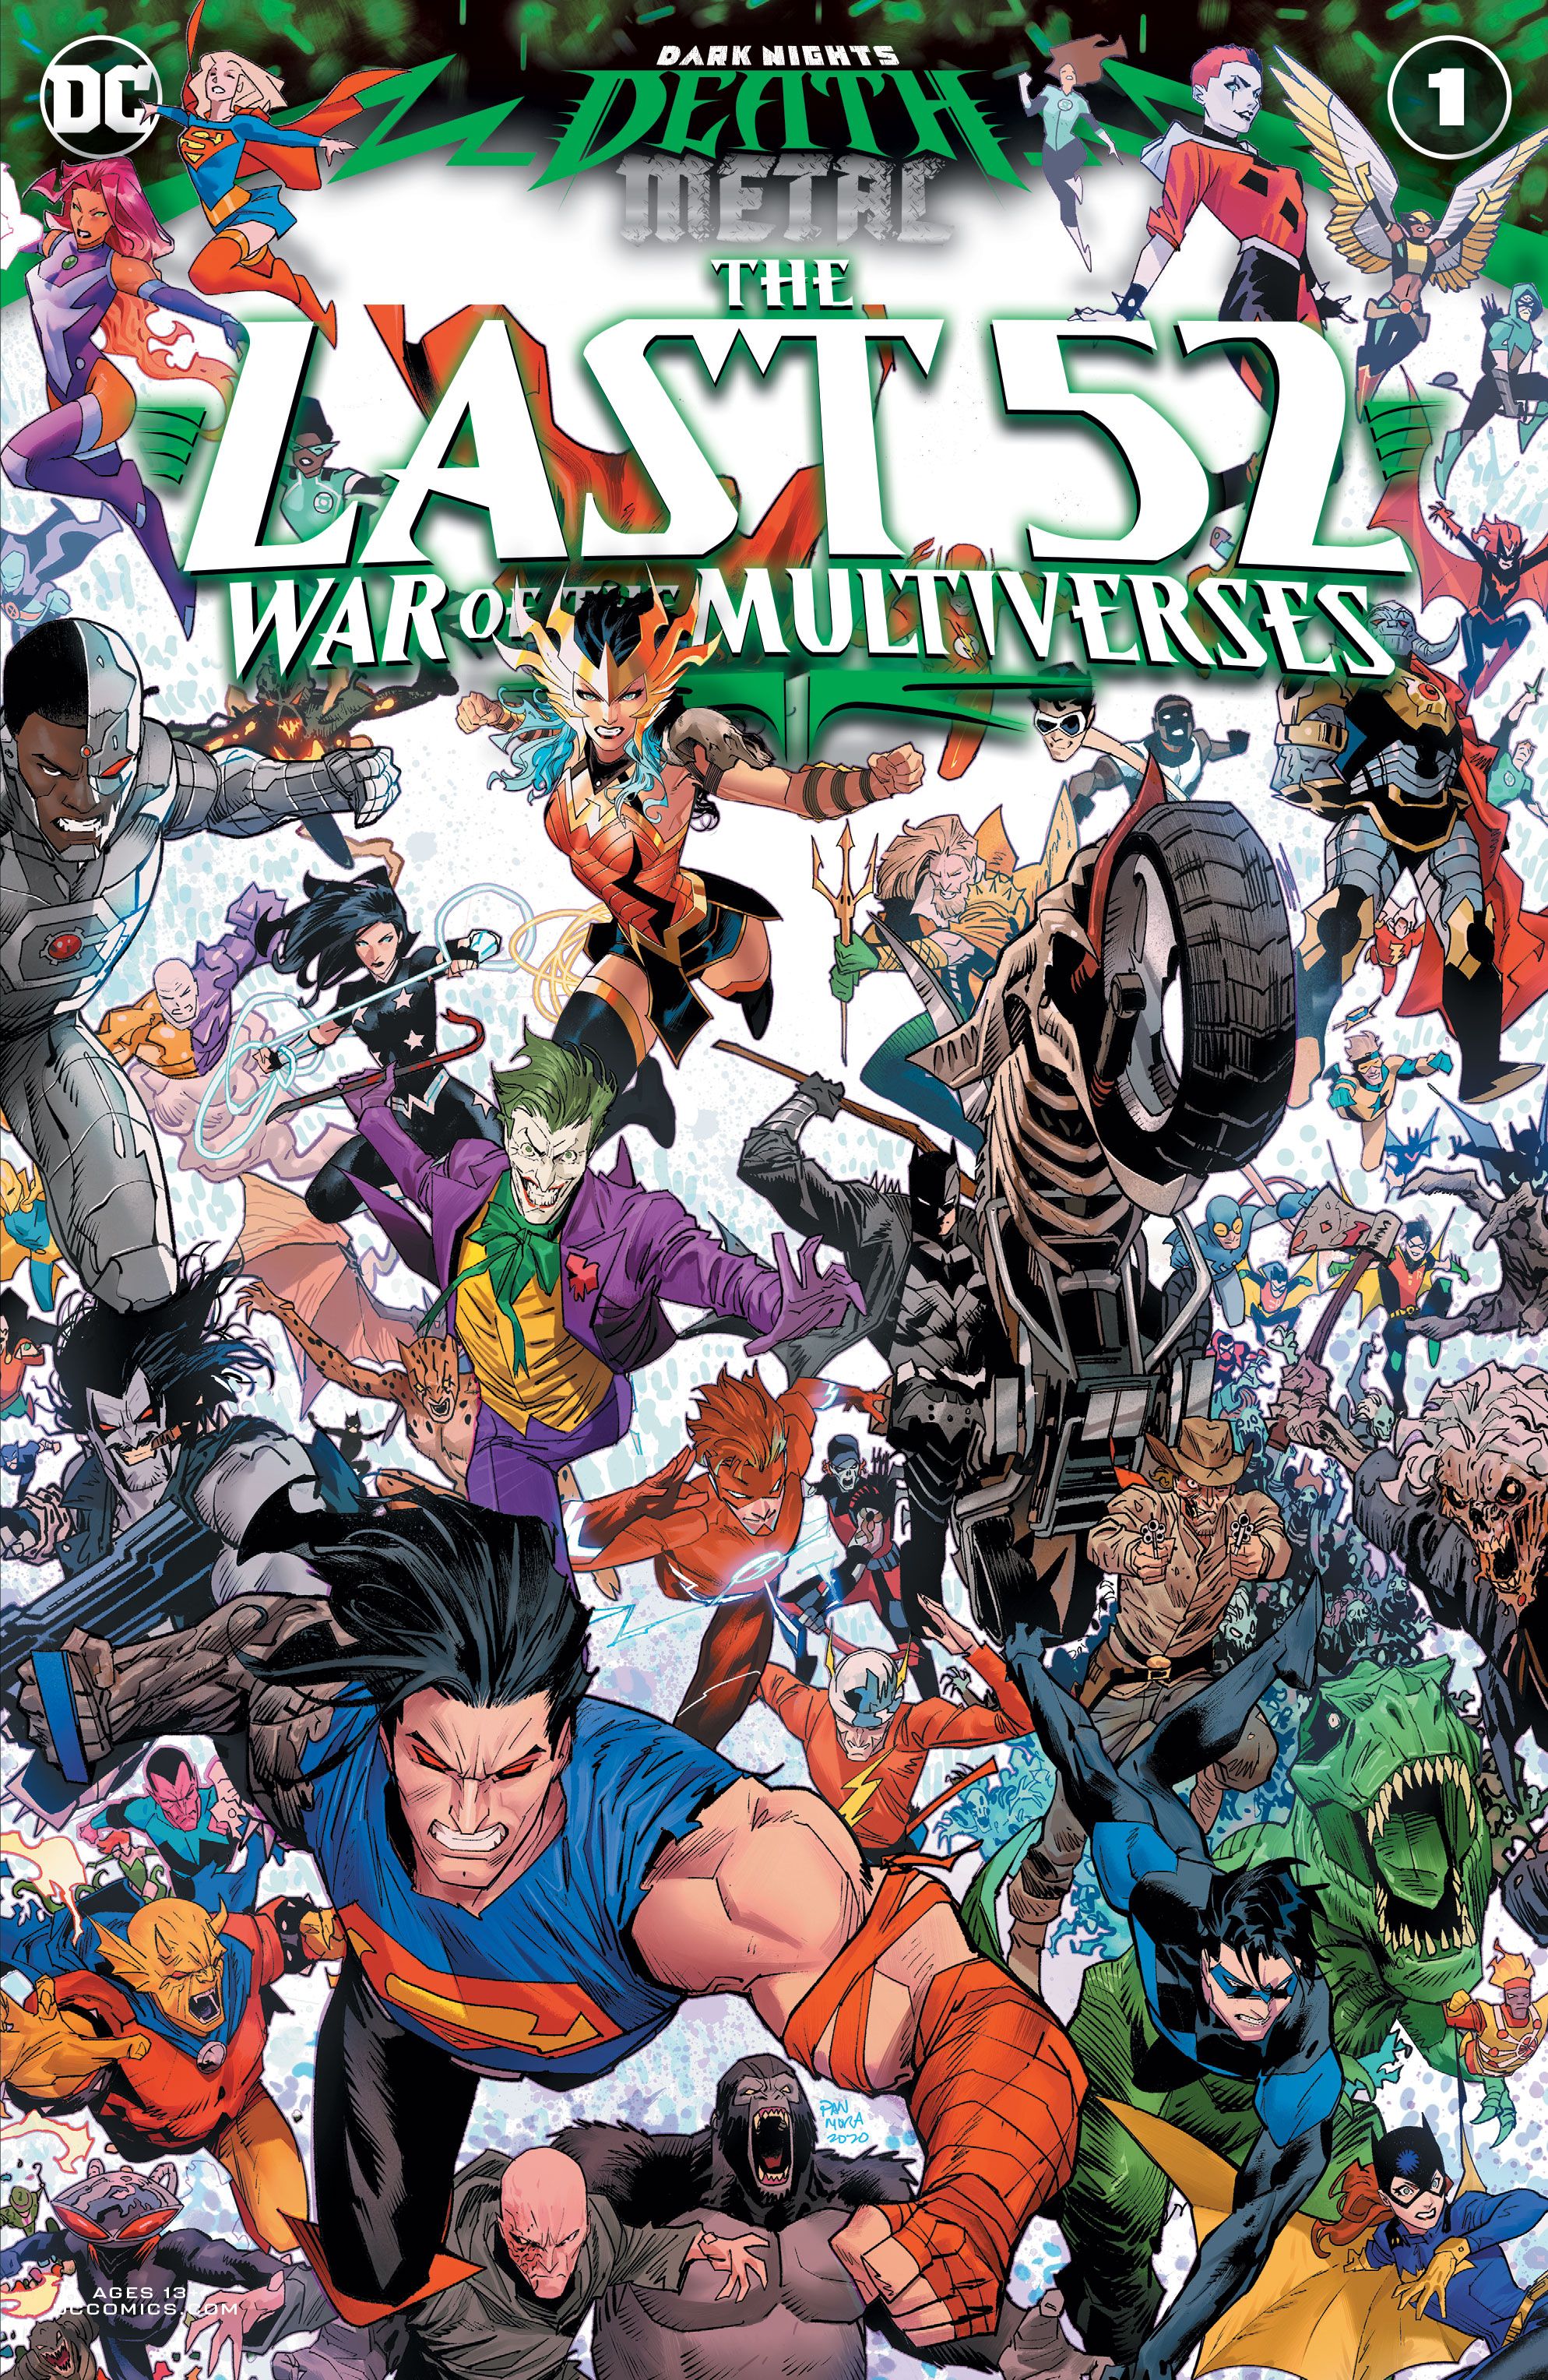 The War For The Multiverses Begins In DC’s The Last 52 Preview